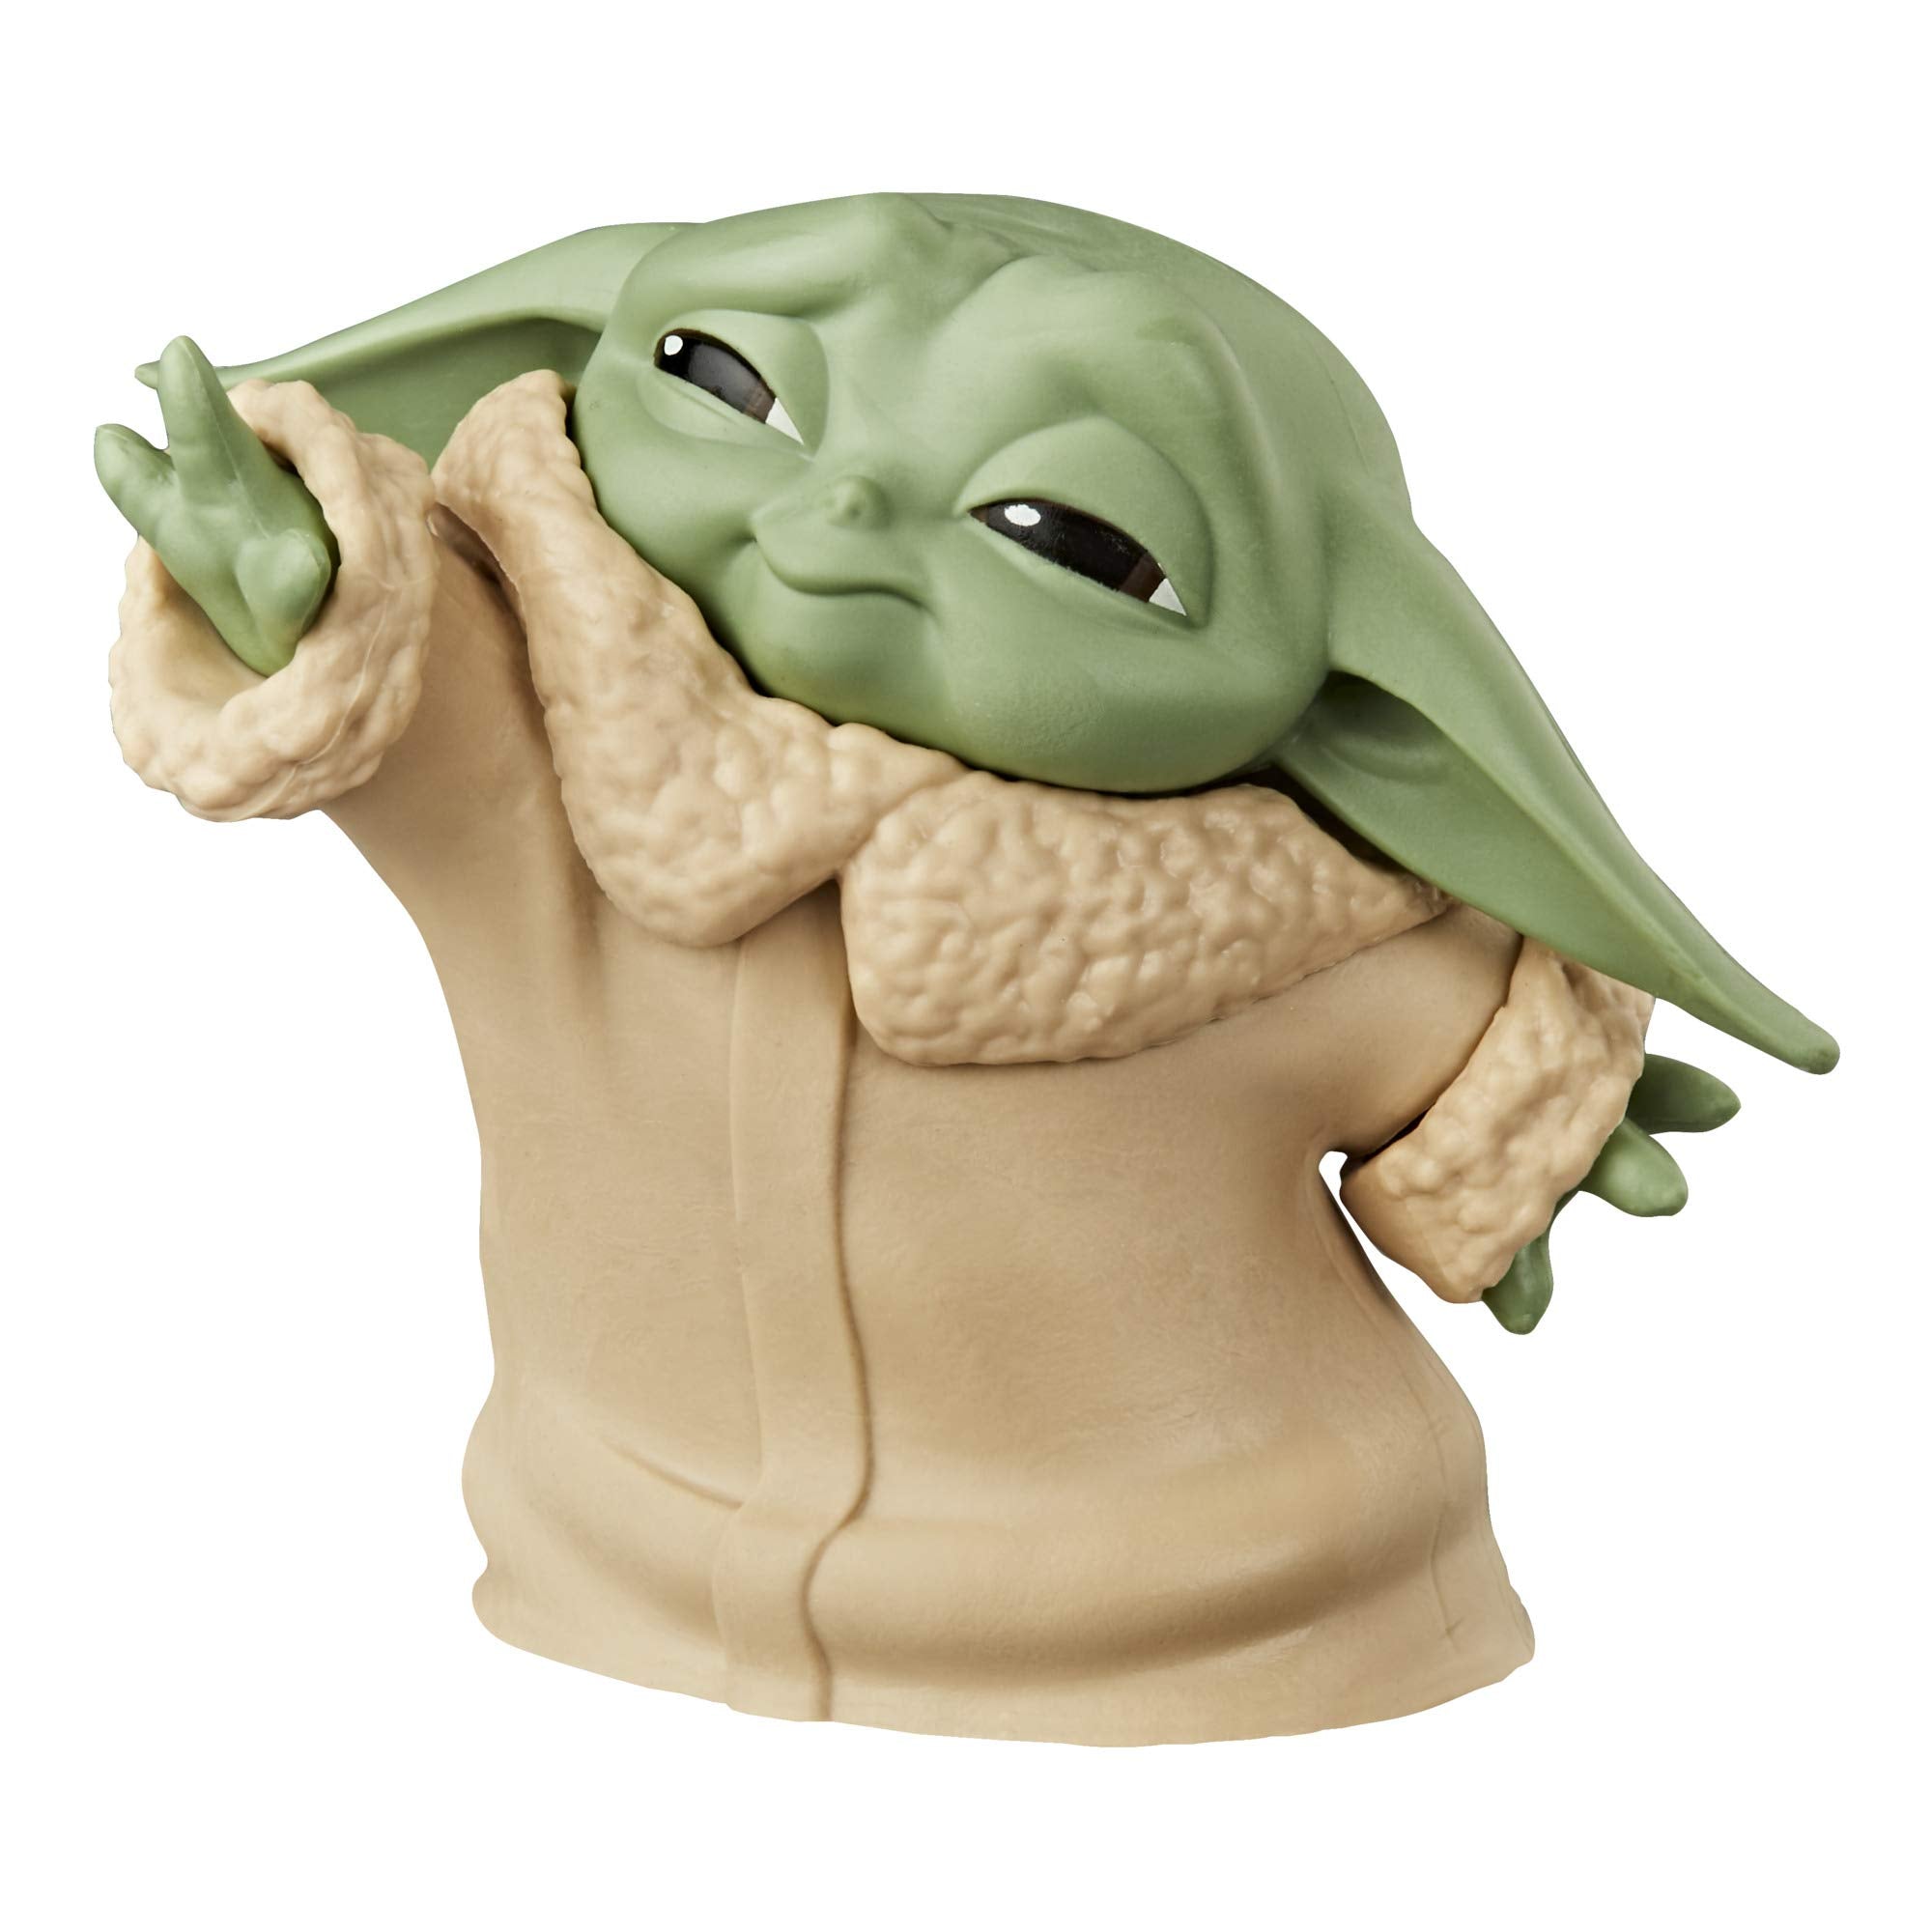 Star Wars The Bounty Collection The Child Collectible Toys 2.2-Inch The Mandalorian Baby Yoda Froggy Snack, Force Moment Figure 2-Pack